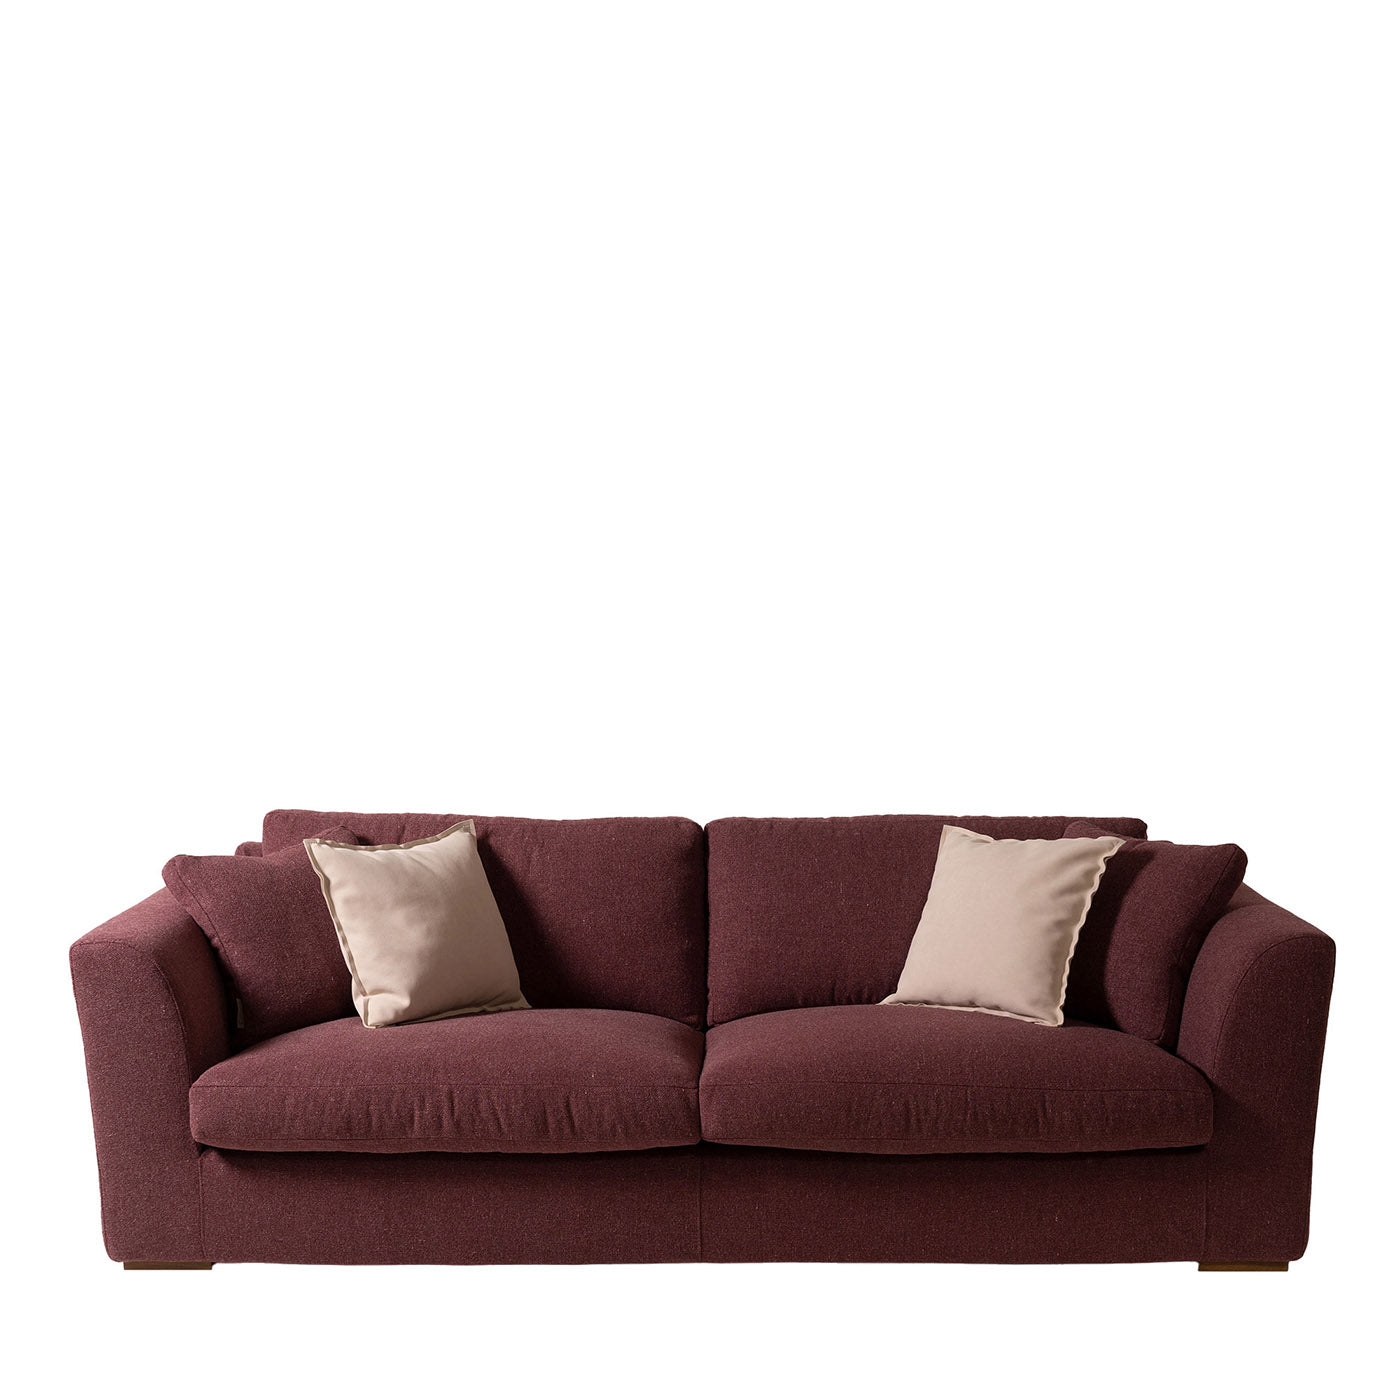 Sandy Sofa 3 Seater by Marco and Giulio Mantellassi - Main view